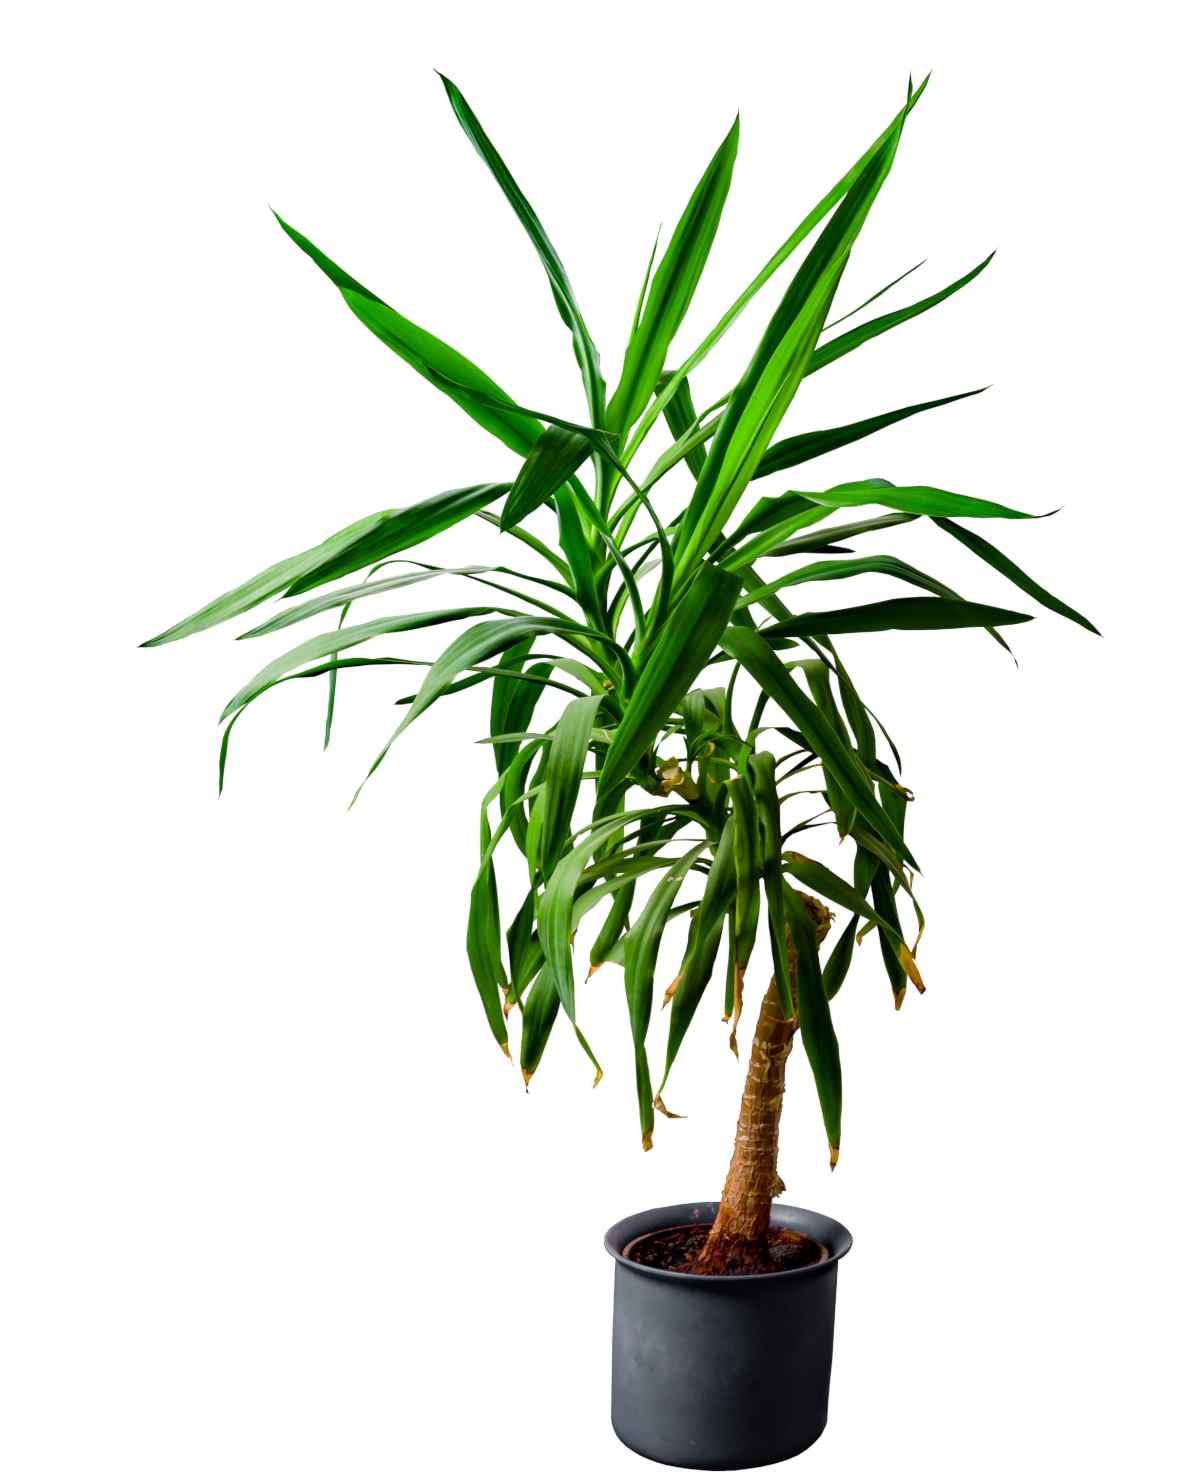 Yucca in a pot with a white background